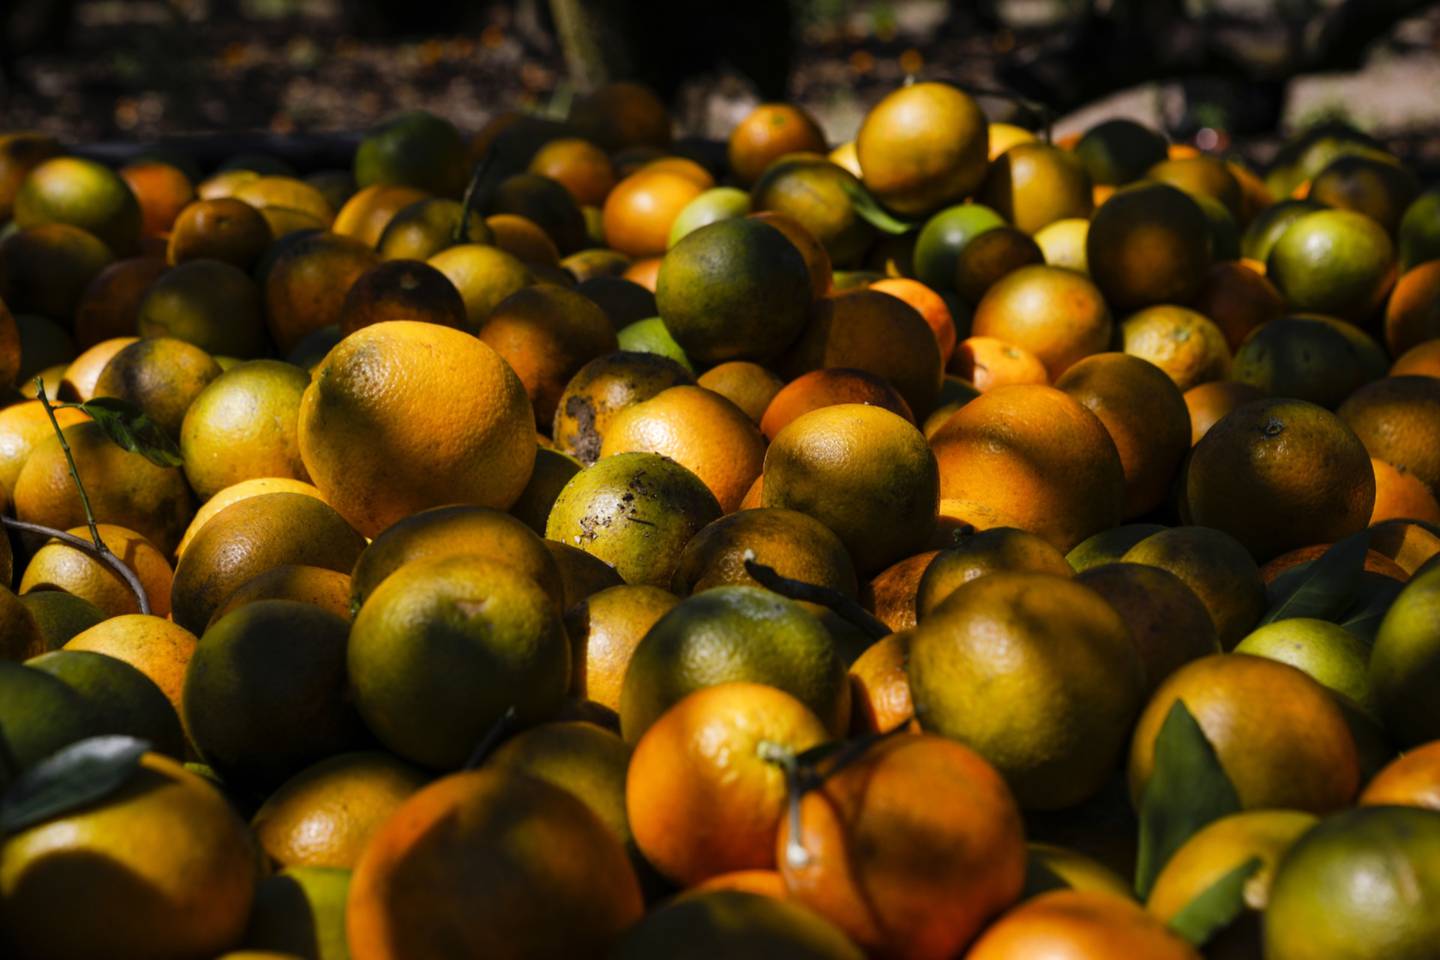 Oranges in a basket during a harvest in Avon Park, Florida, U.S., on Wednesday, March 2, 2022. Florida will produce the smallest crop of oranges in more than 75 years, reported the AP.